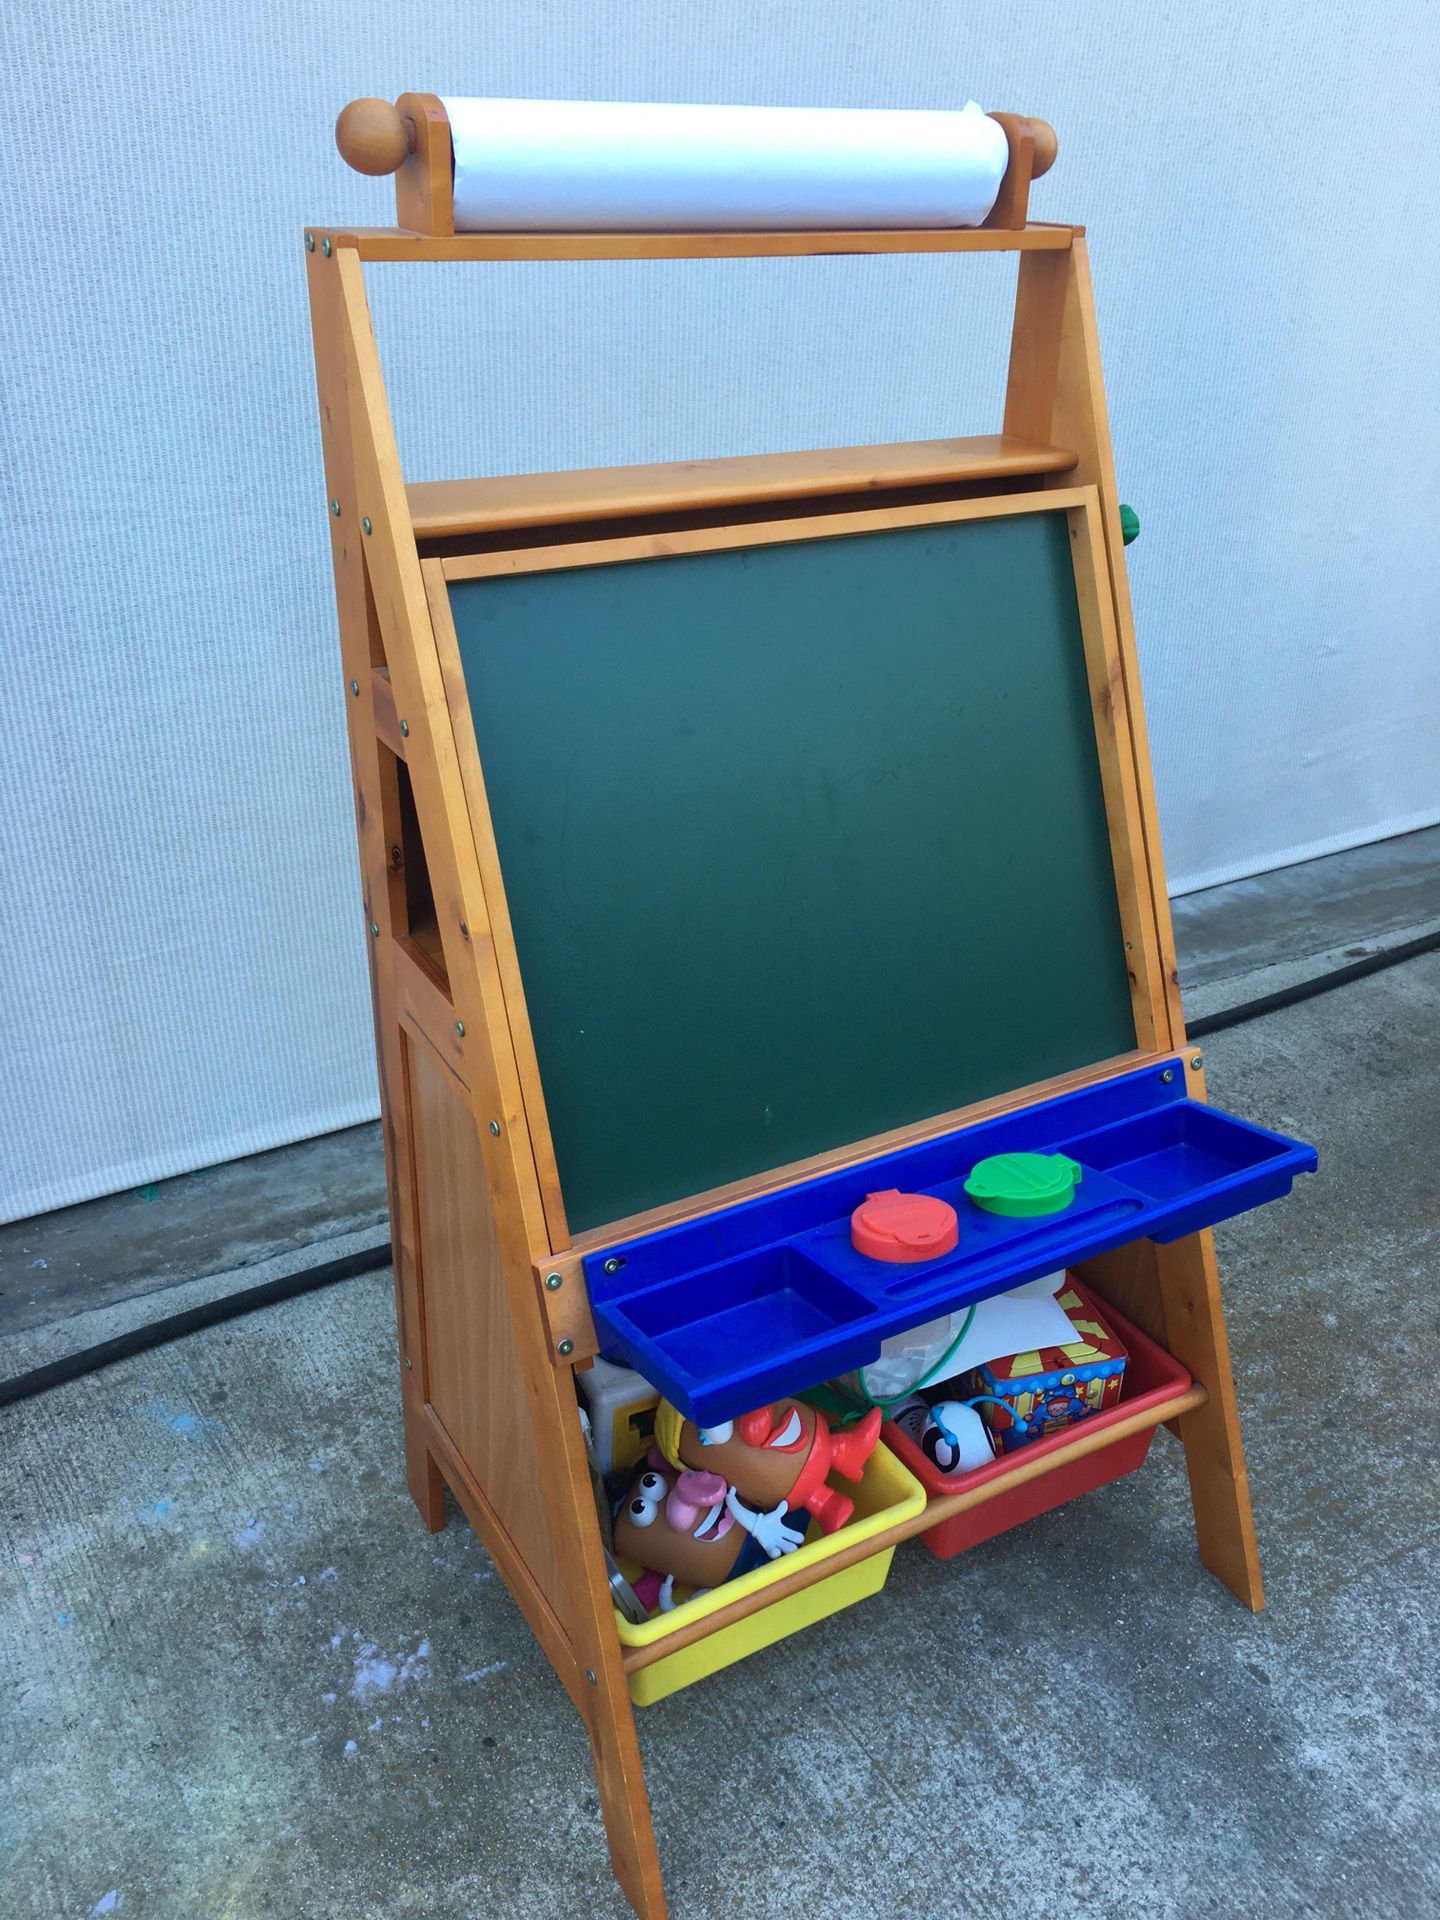 Activity table/drawing easel